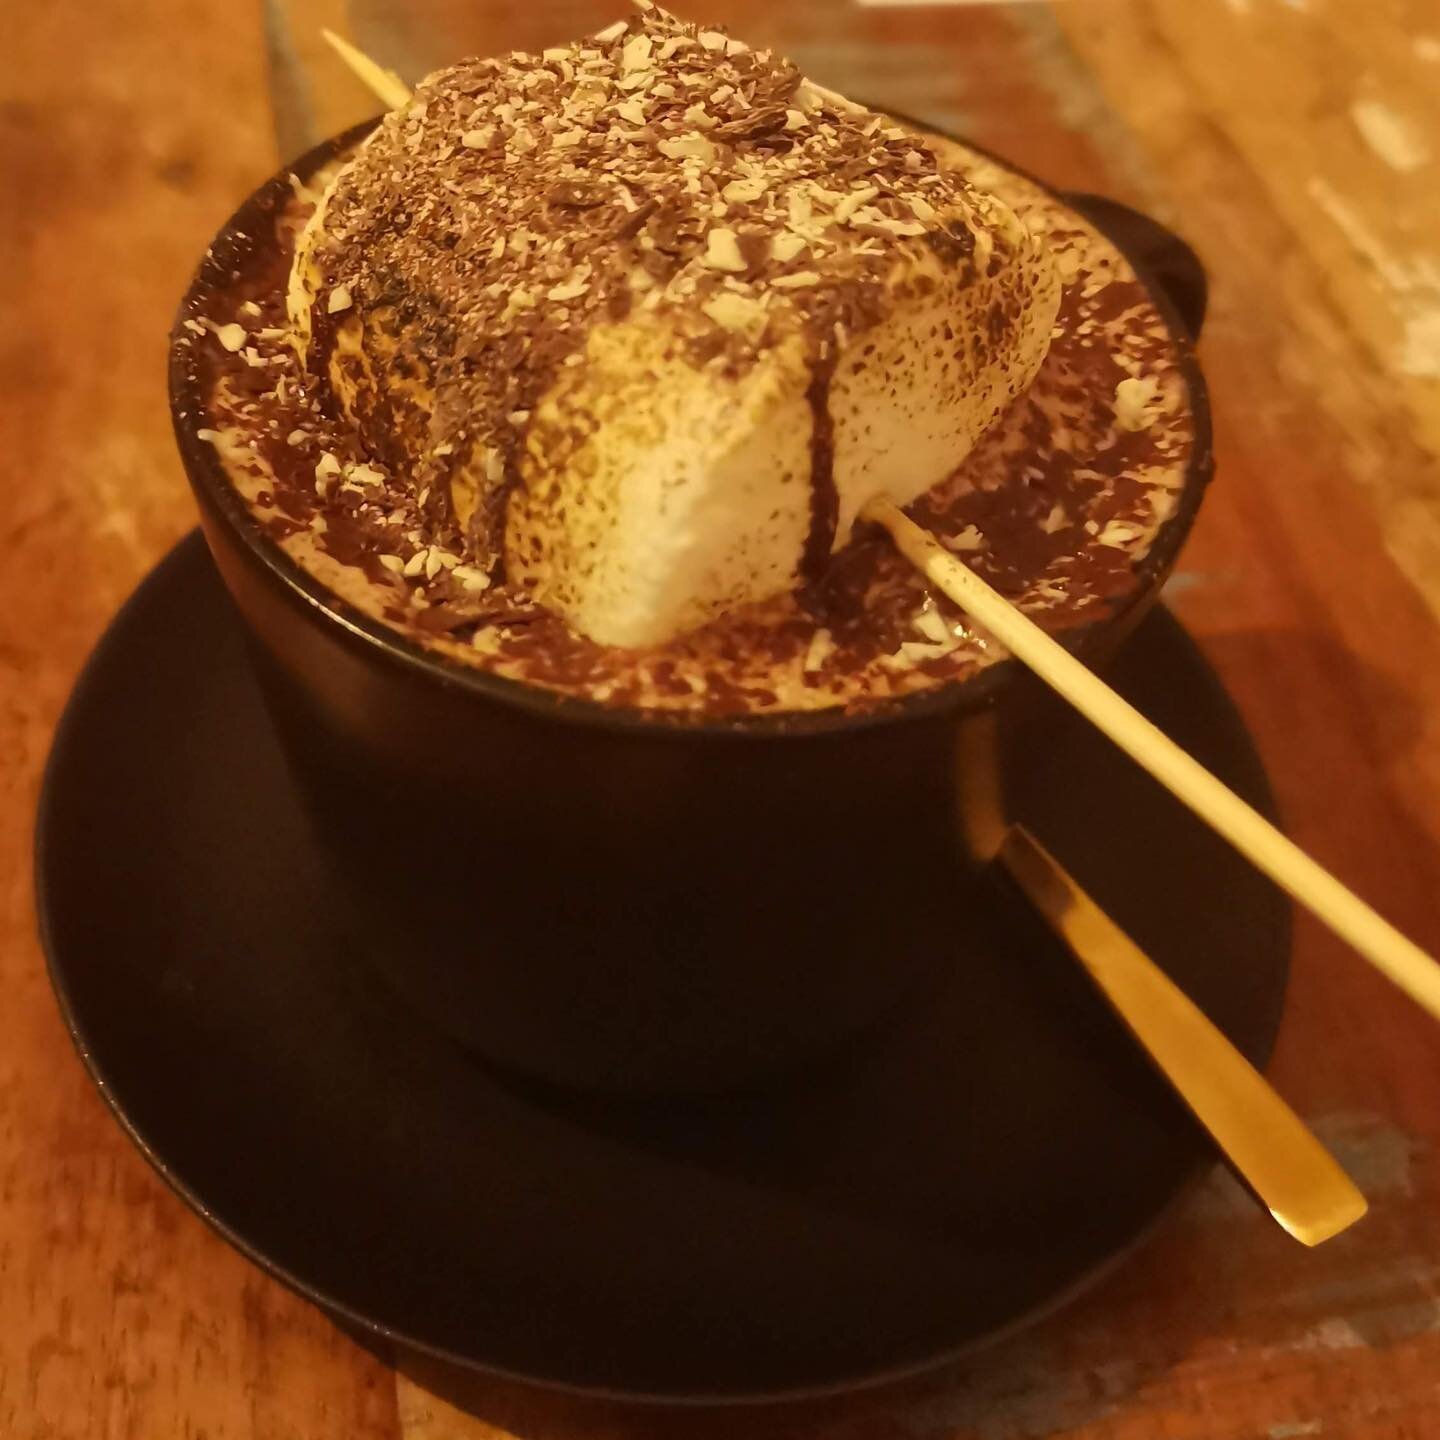 Elisabeth&rsquo;s is an adorable little dessert place in Kingsland that serves the BEST hot chocolate I&rsquo;ve ever tasted. This cozy and old-fashioned cafe is a perfect spot for a date night. Whether you&rsquo;re looking for a hot chocolatey drink